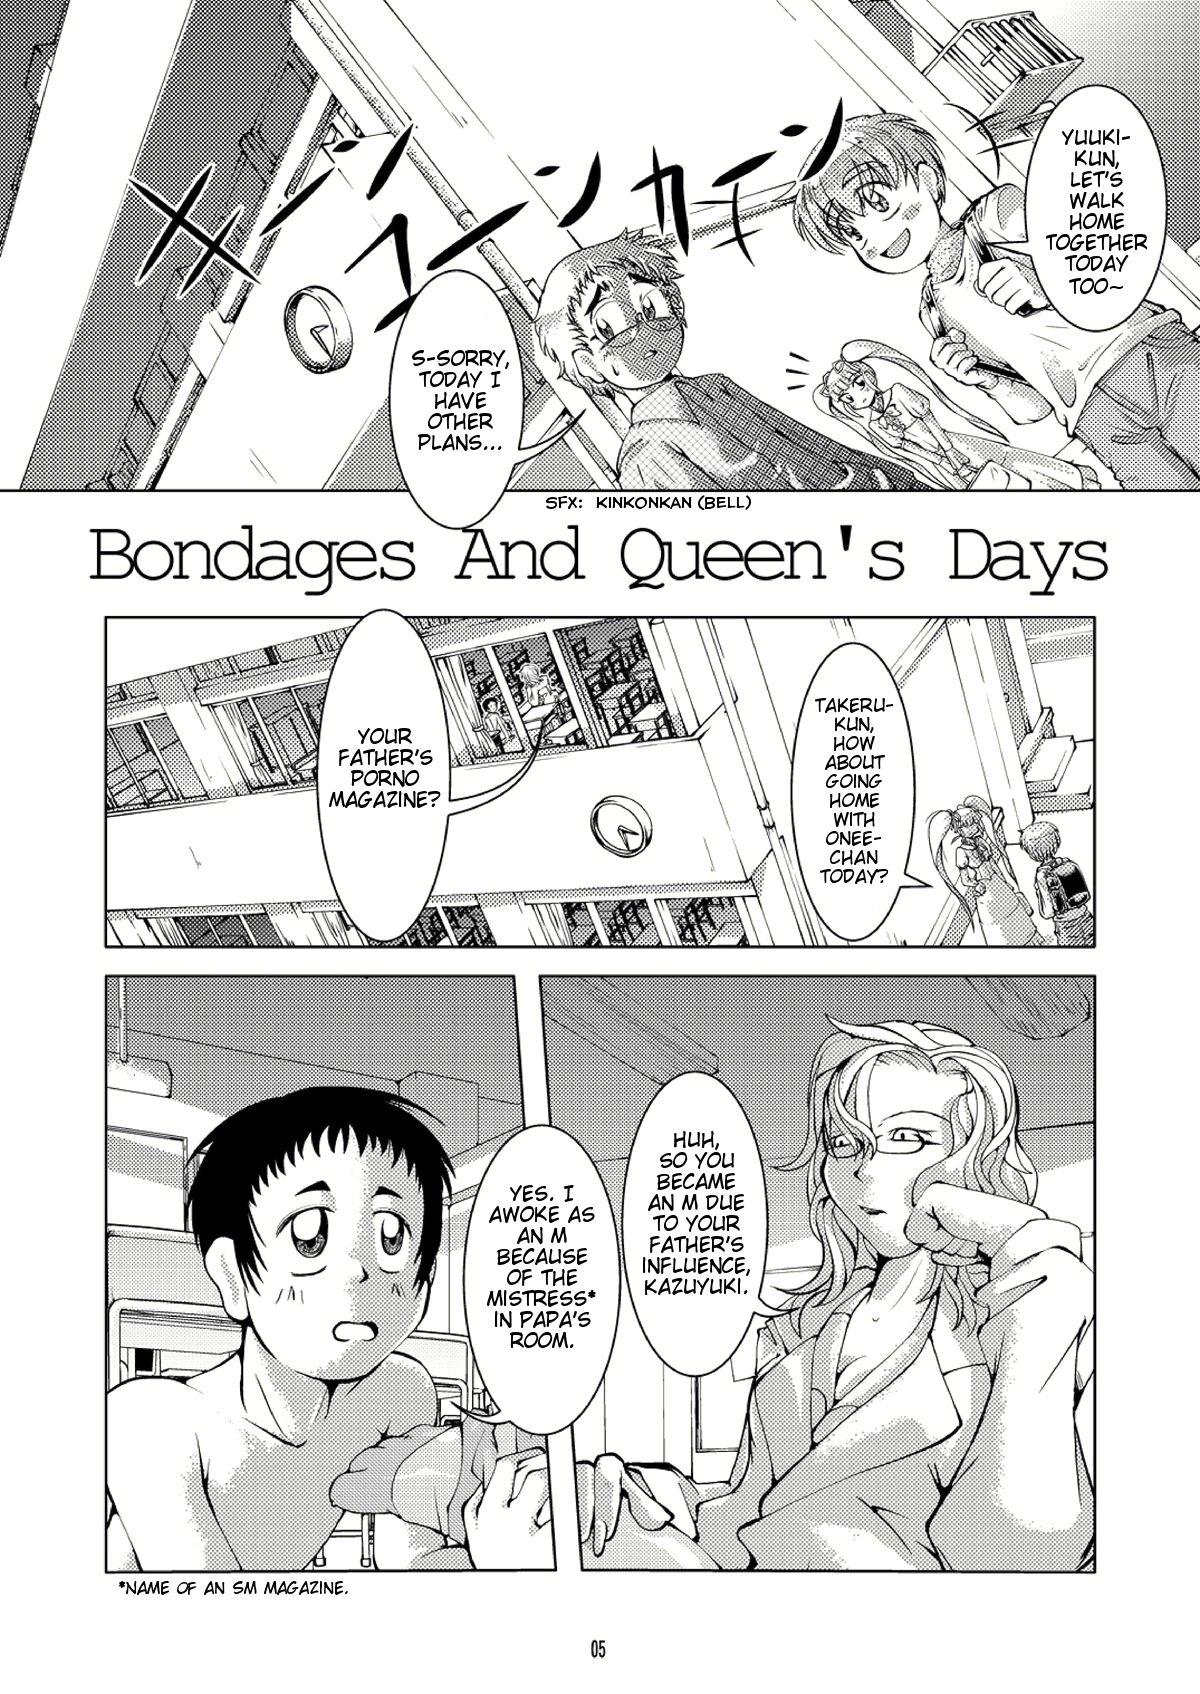 Bondages and Queen's Days 4